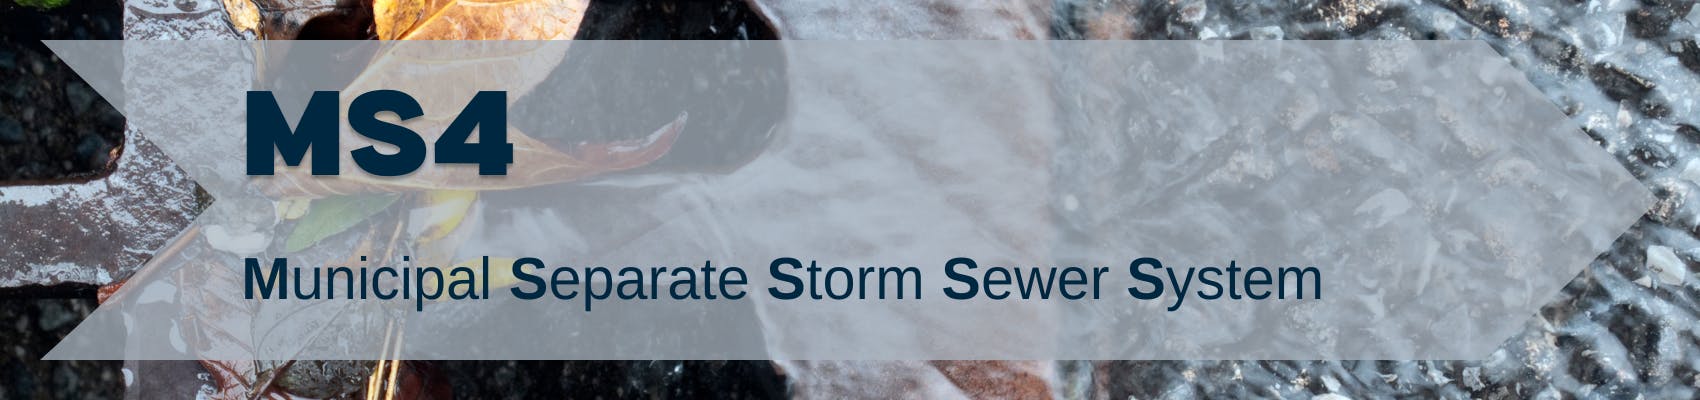 MS4: Municipal Separate Storm Sewer System over stock image of drain